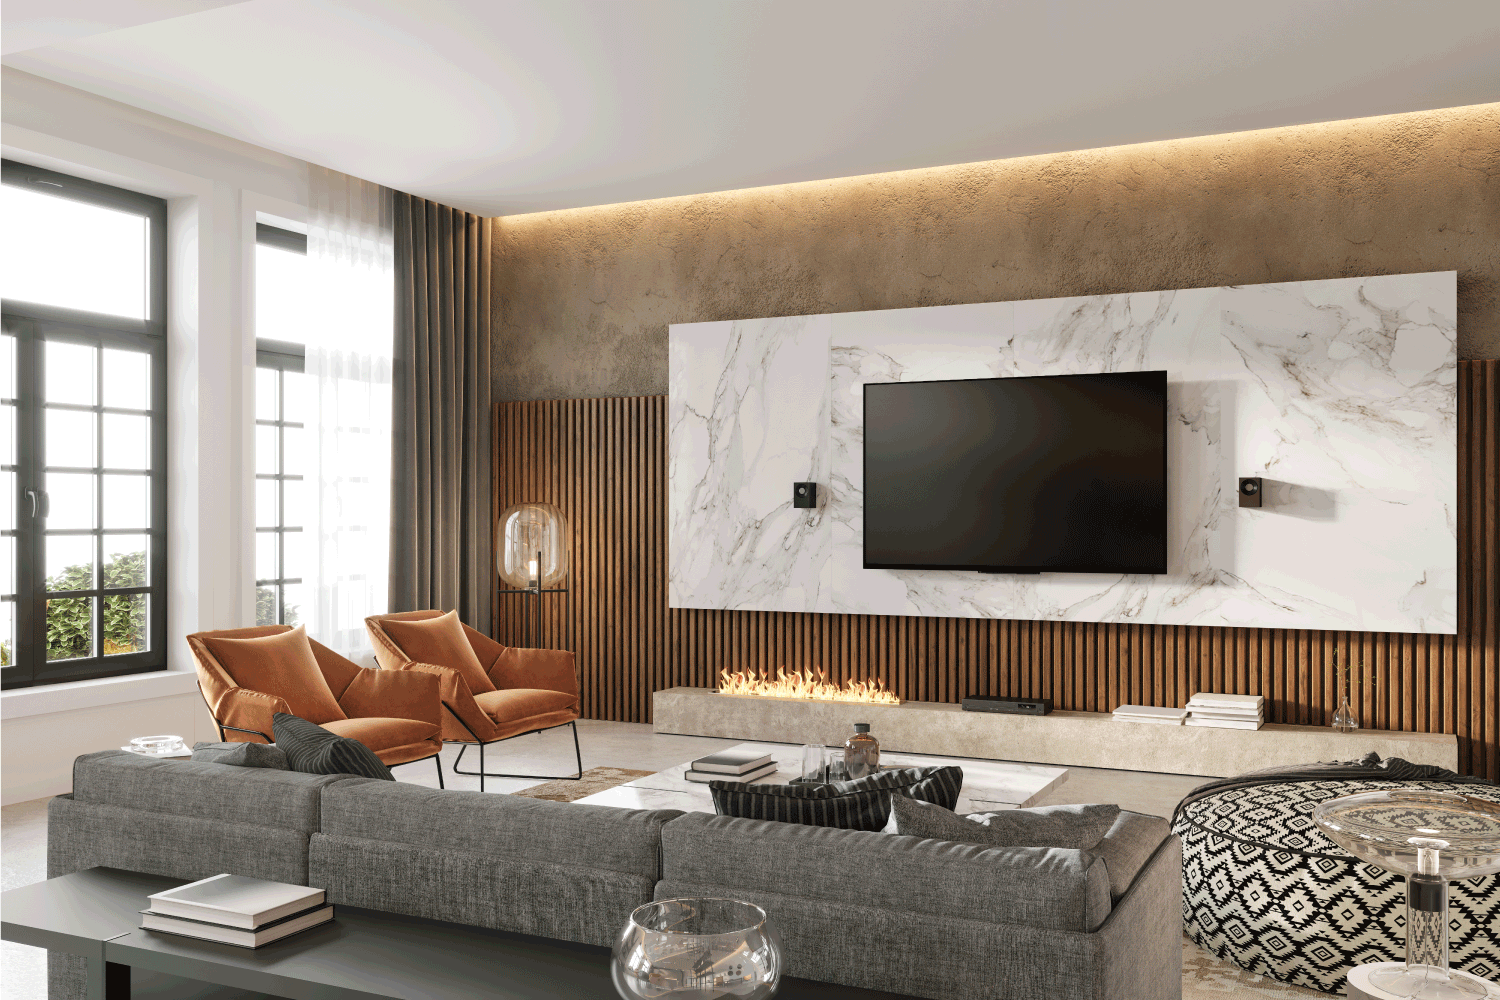 Large living room interior with TV television screen on the wall